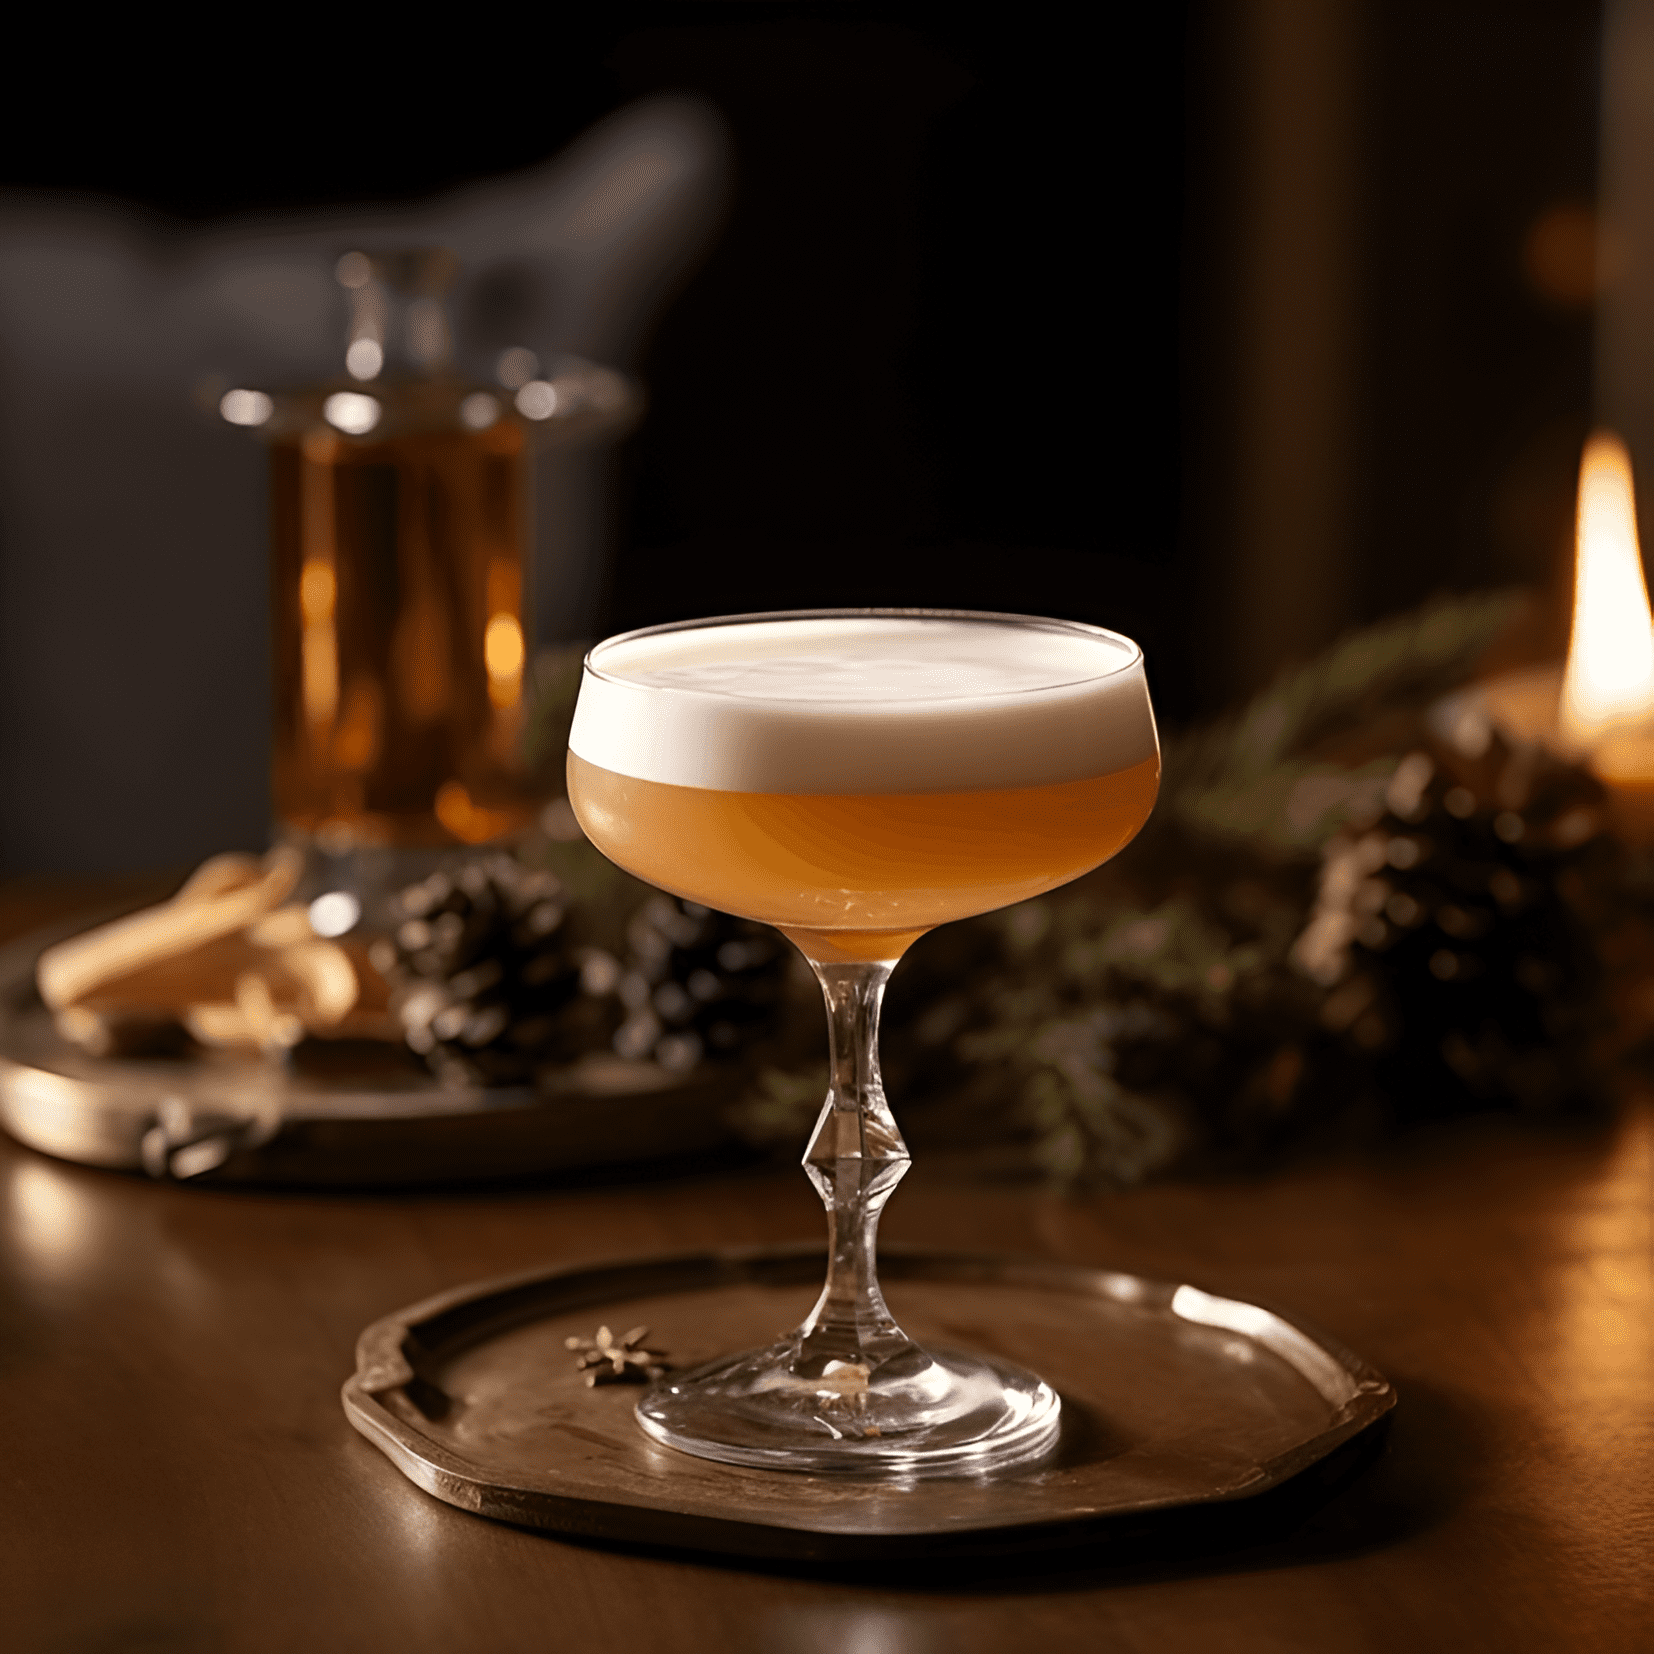 Bourbon Flip Cocktail Recipe - The Bourbon Flip has a rich, creamy, and smooth taste with a hint of sweetness from the simple syrup. The bourbon adds a warm, oaky, and slightly spicy flavor, while the egg gives the drink a frothy and velvety texture.